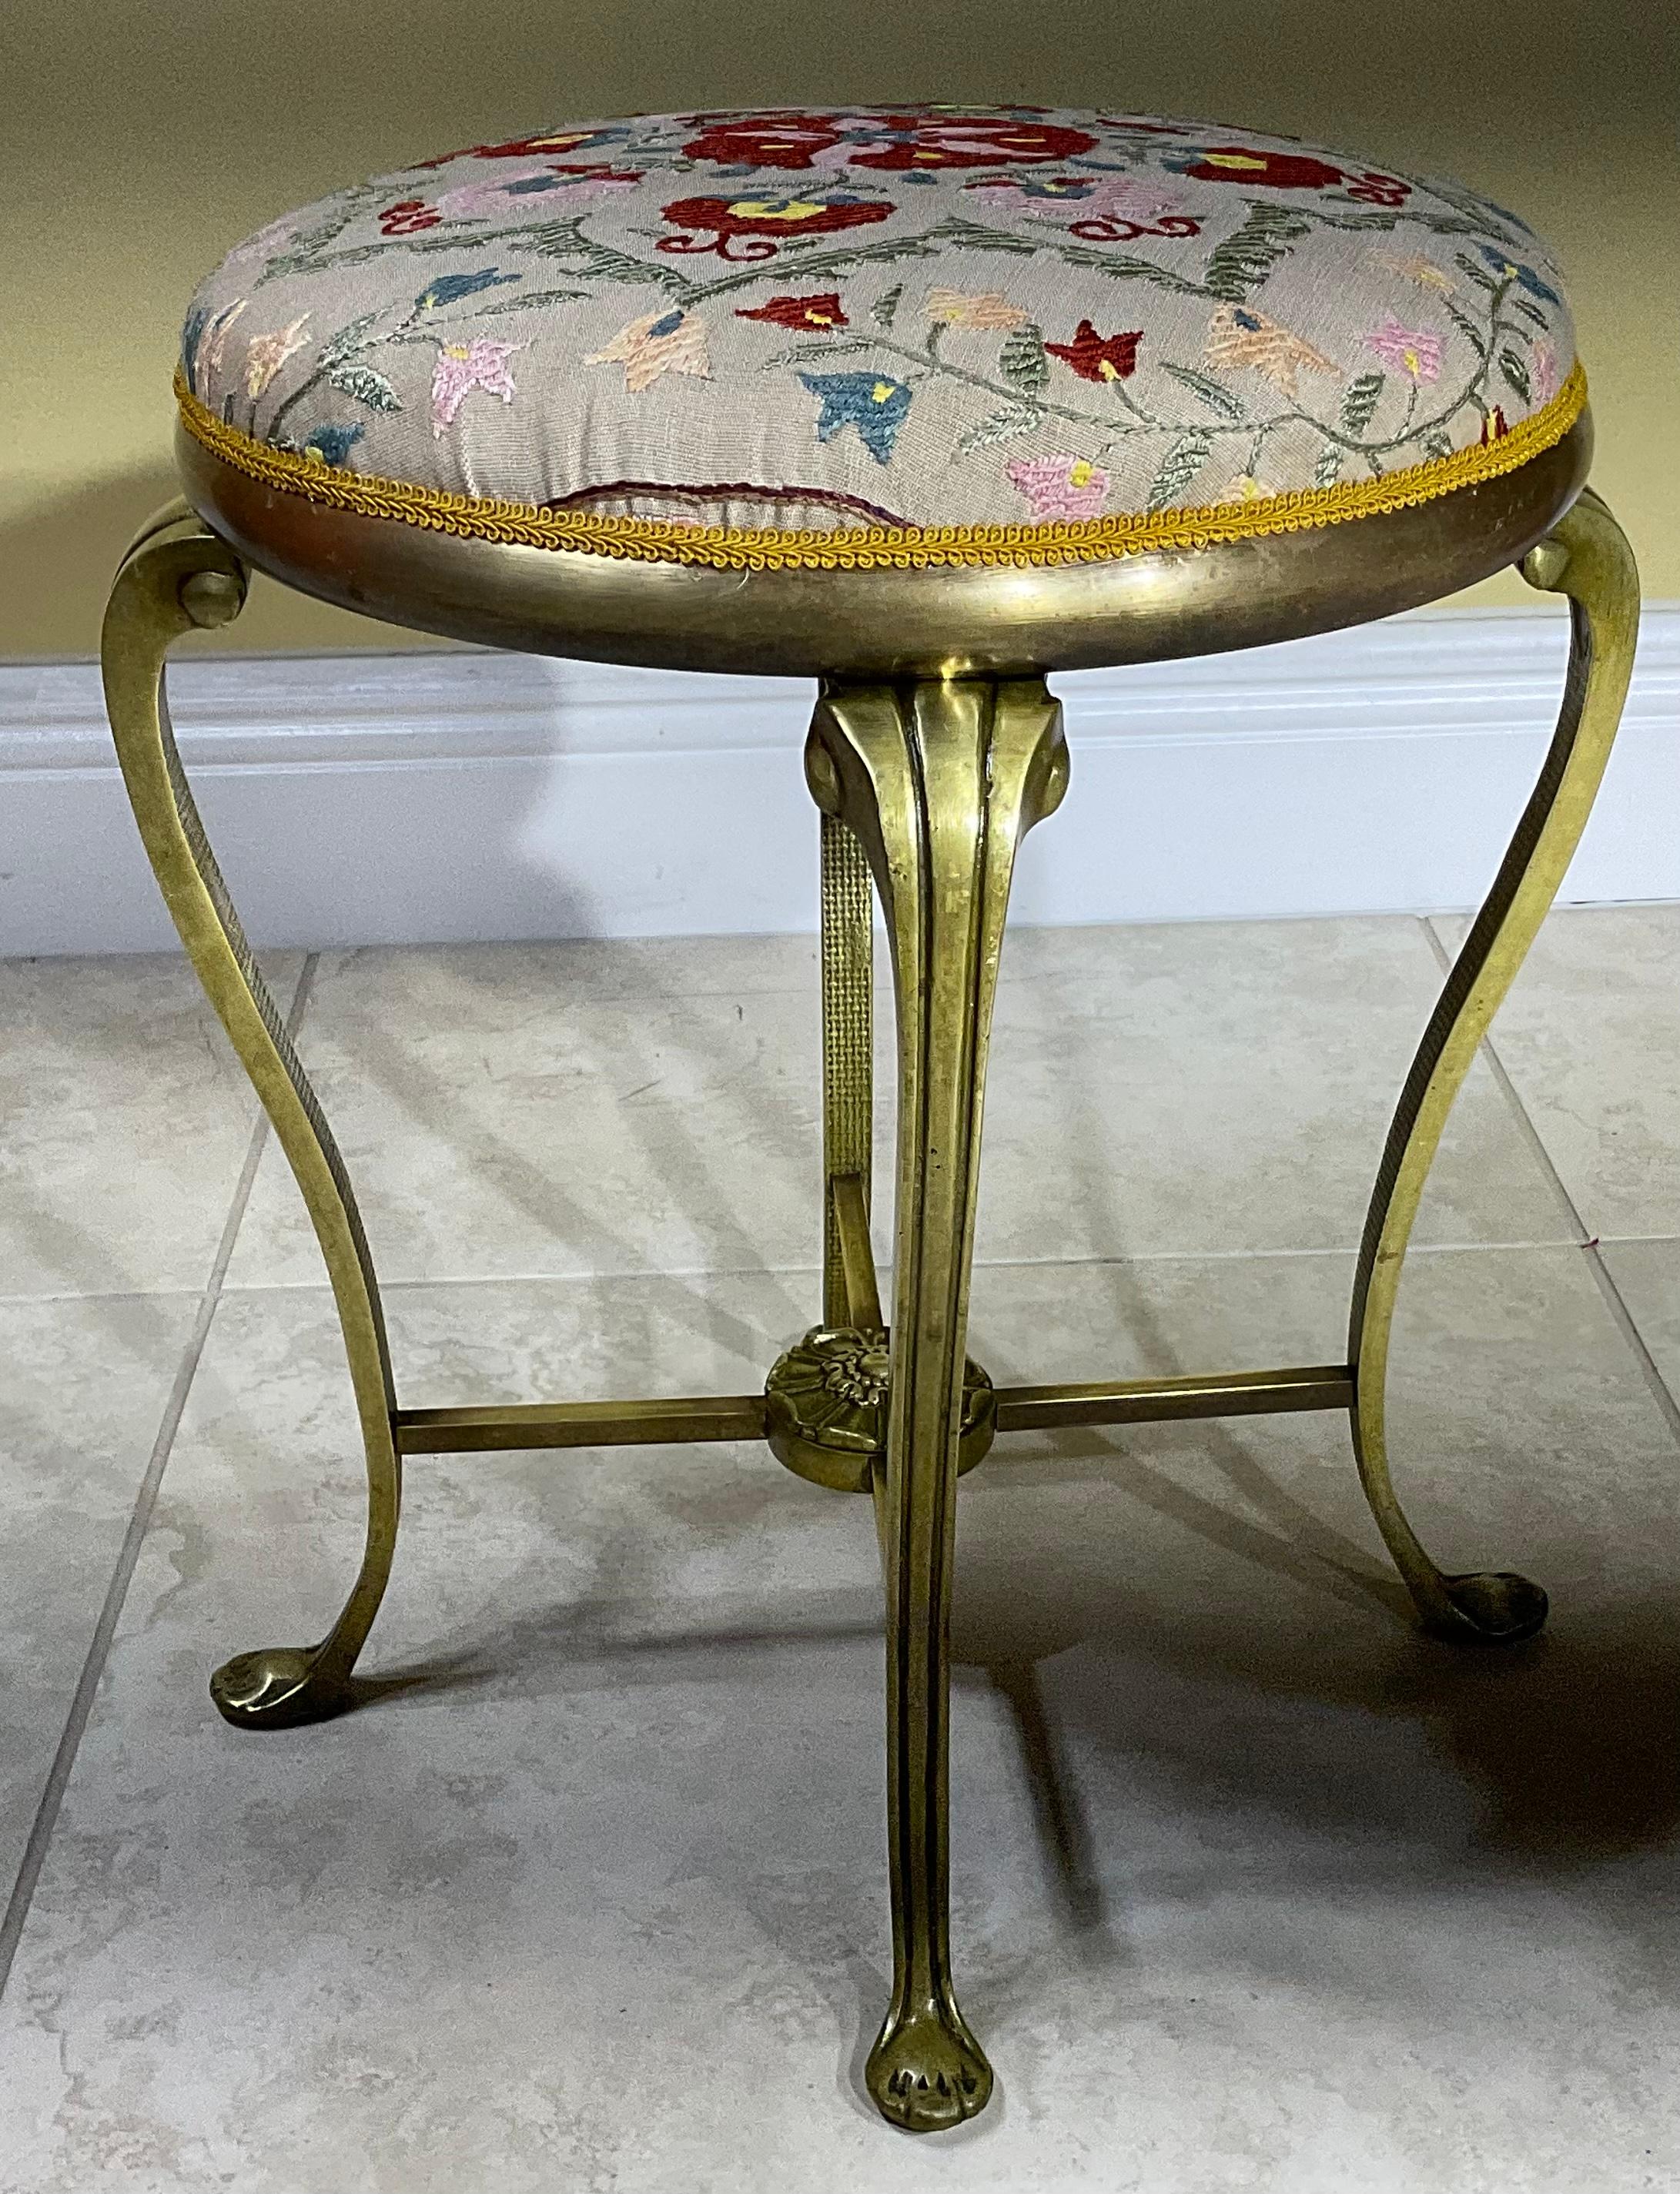 Vintage Brass Suzani Foot Stool In Good Condition For Sale In Delray Beach, FL